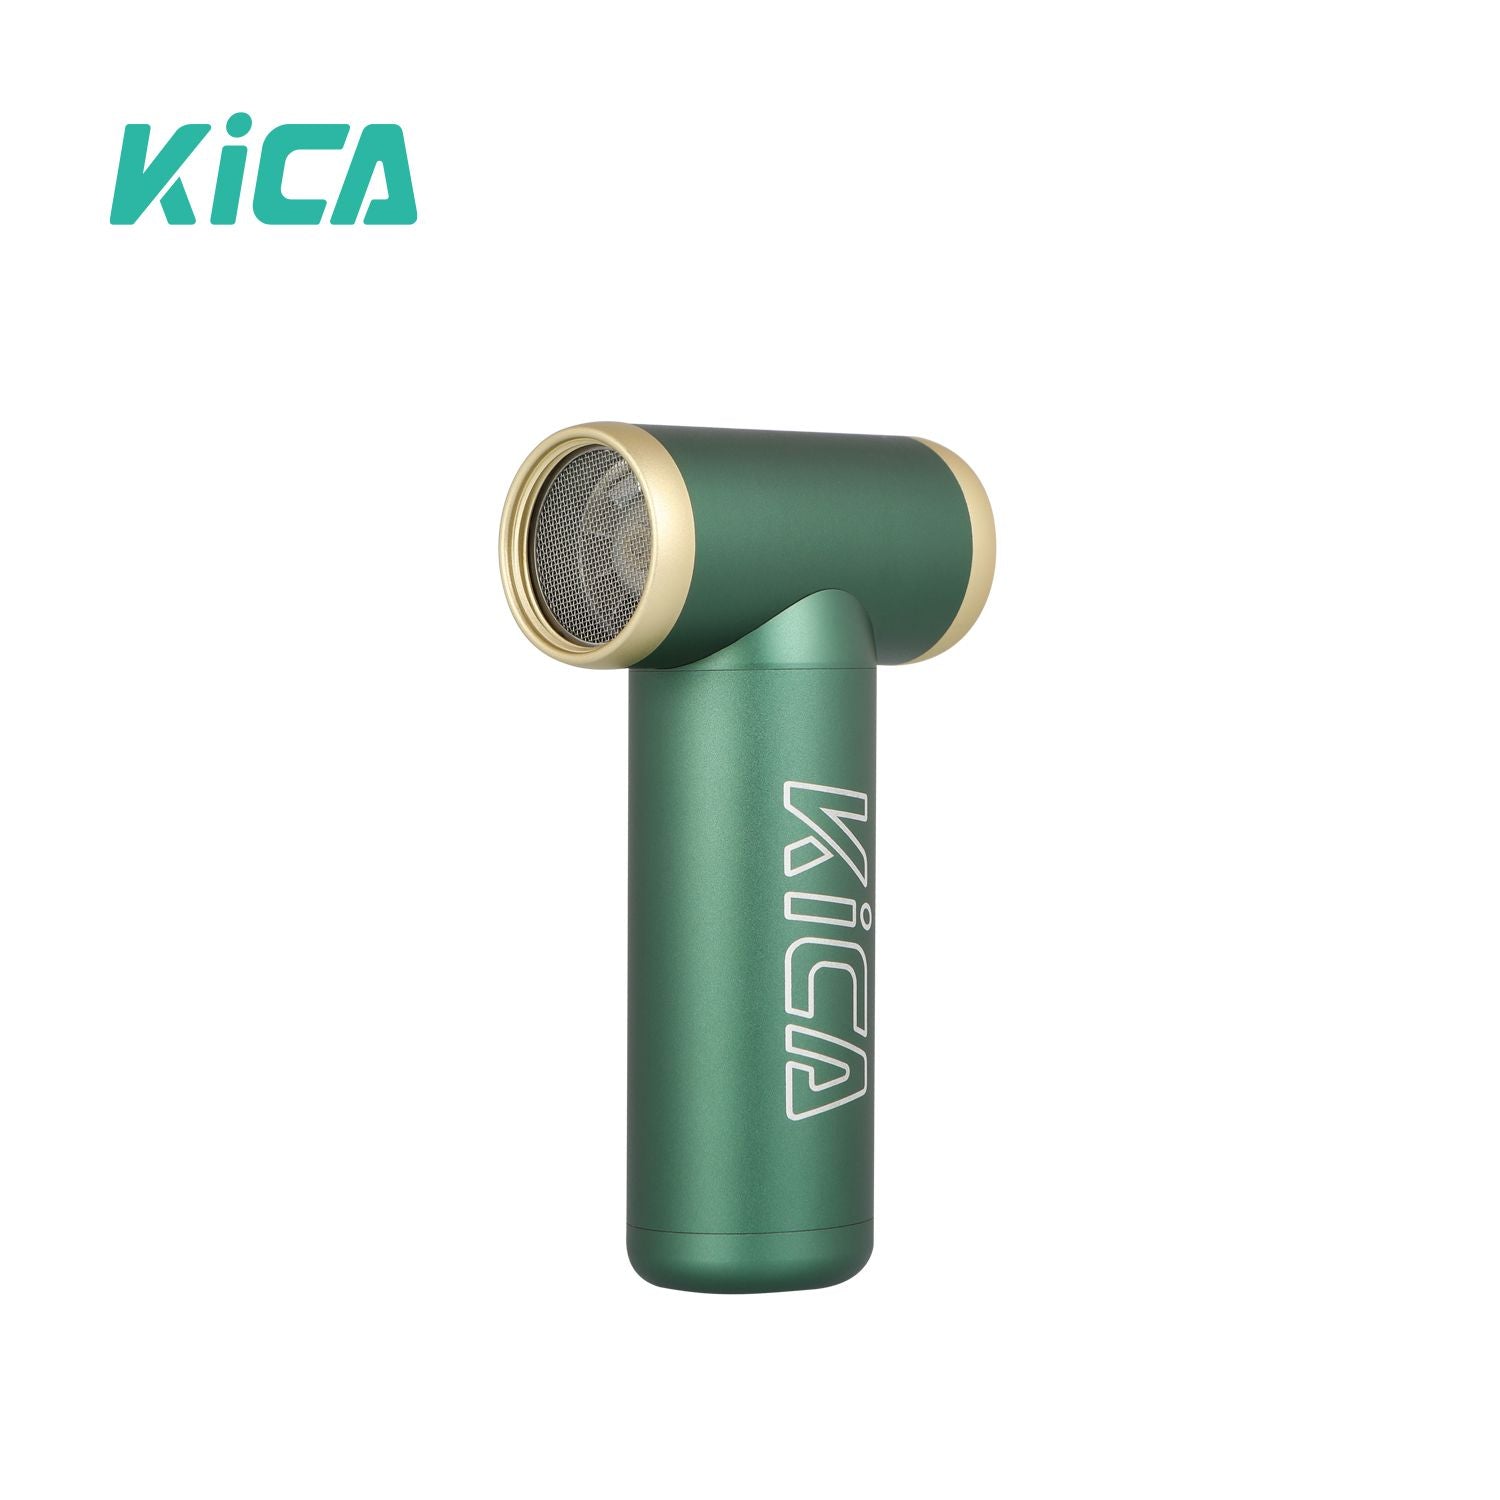 KiCA Jet Fan 2 | Compact But Powerful Air Duster – KICA